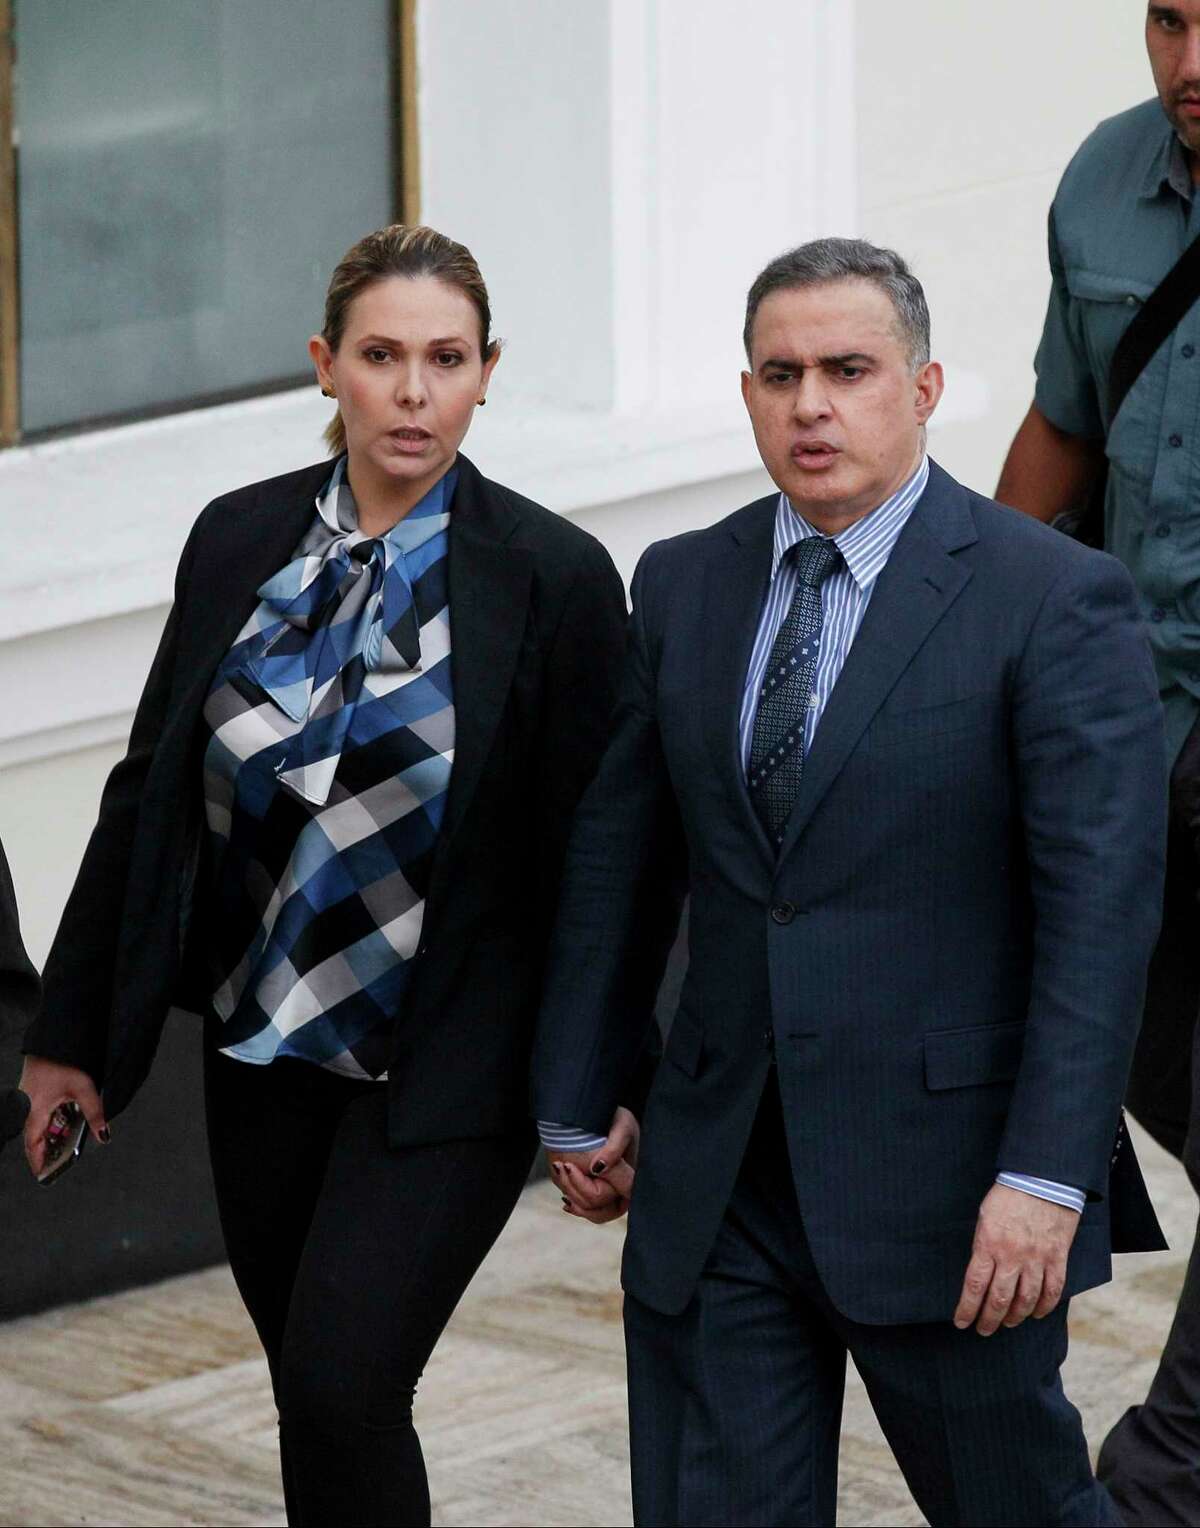 Venezuela's ombudsman Tarek William Saab, right, and his wife Carla Di Martino arrive to Constitutional Assembly, in Caracas, Venezuela, Saturday, Aug. 5, 2017. A newly installed constitutional assembly ousted Venezuela's defiant chief prosecutor, a sign that President Nicolas Maduro's embattled government intends to move swiftly against critics and consolidate power amid a fast-moving political crisis. (AP Photo/Ariana Cubillos)